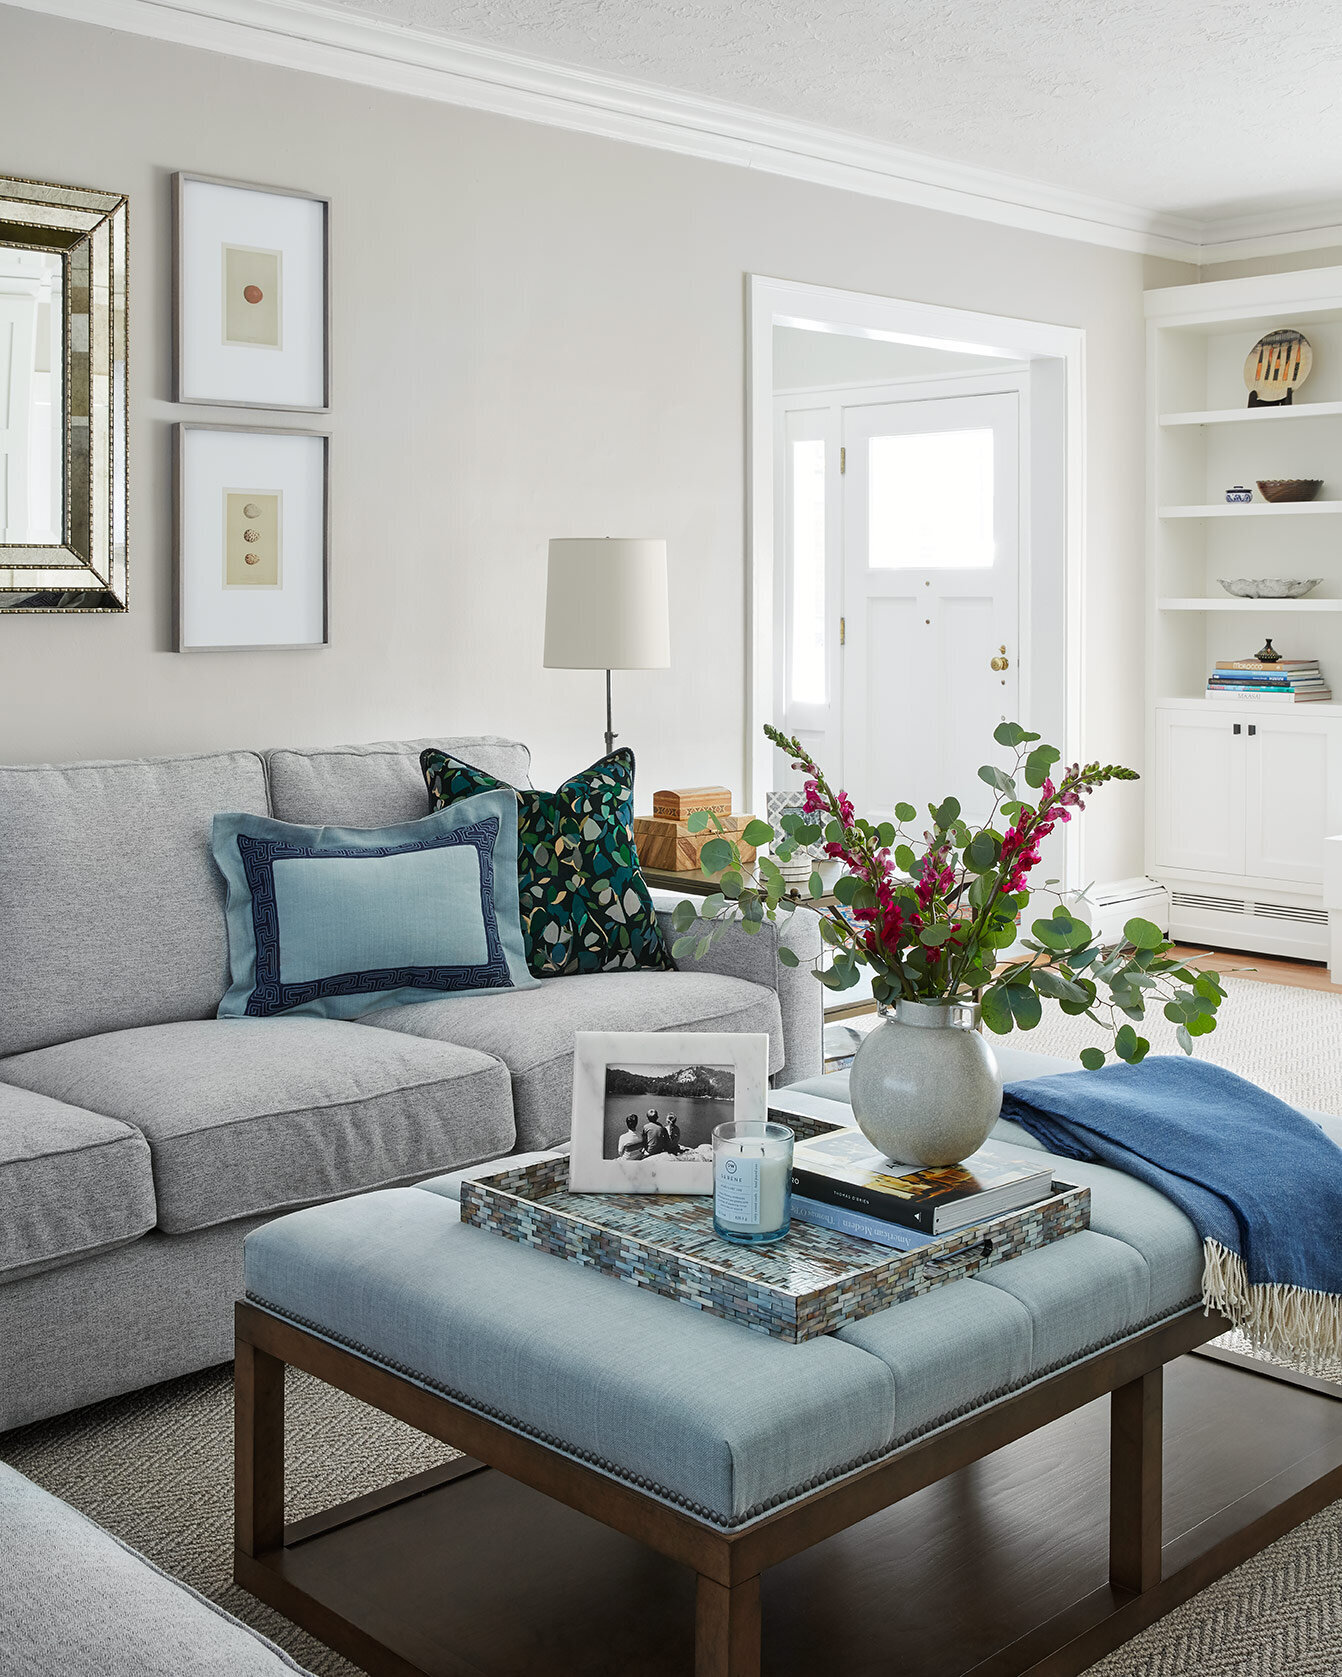 Modern living room design with a light grey couch and blue accents